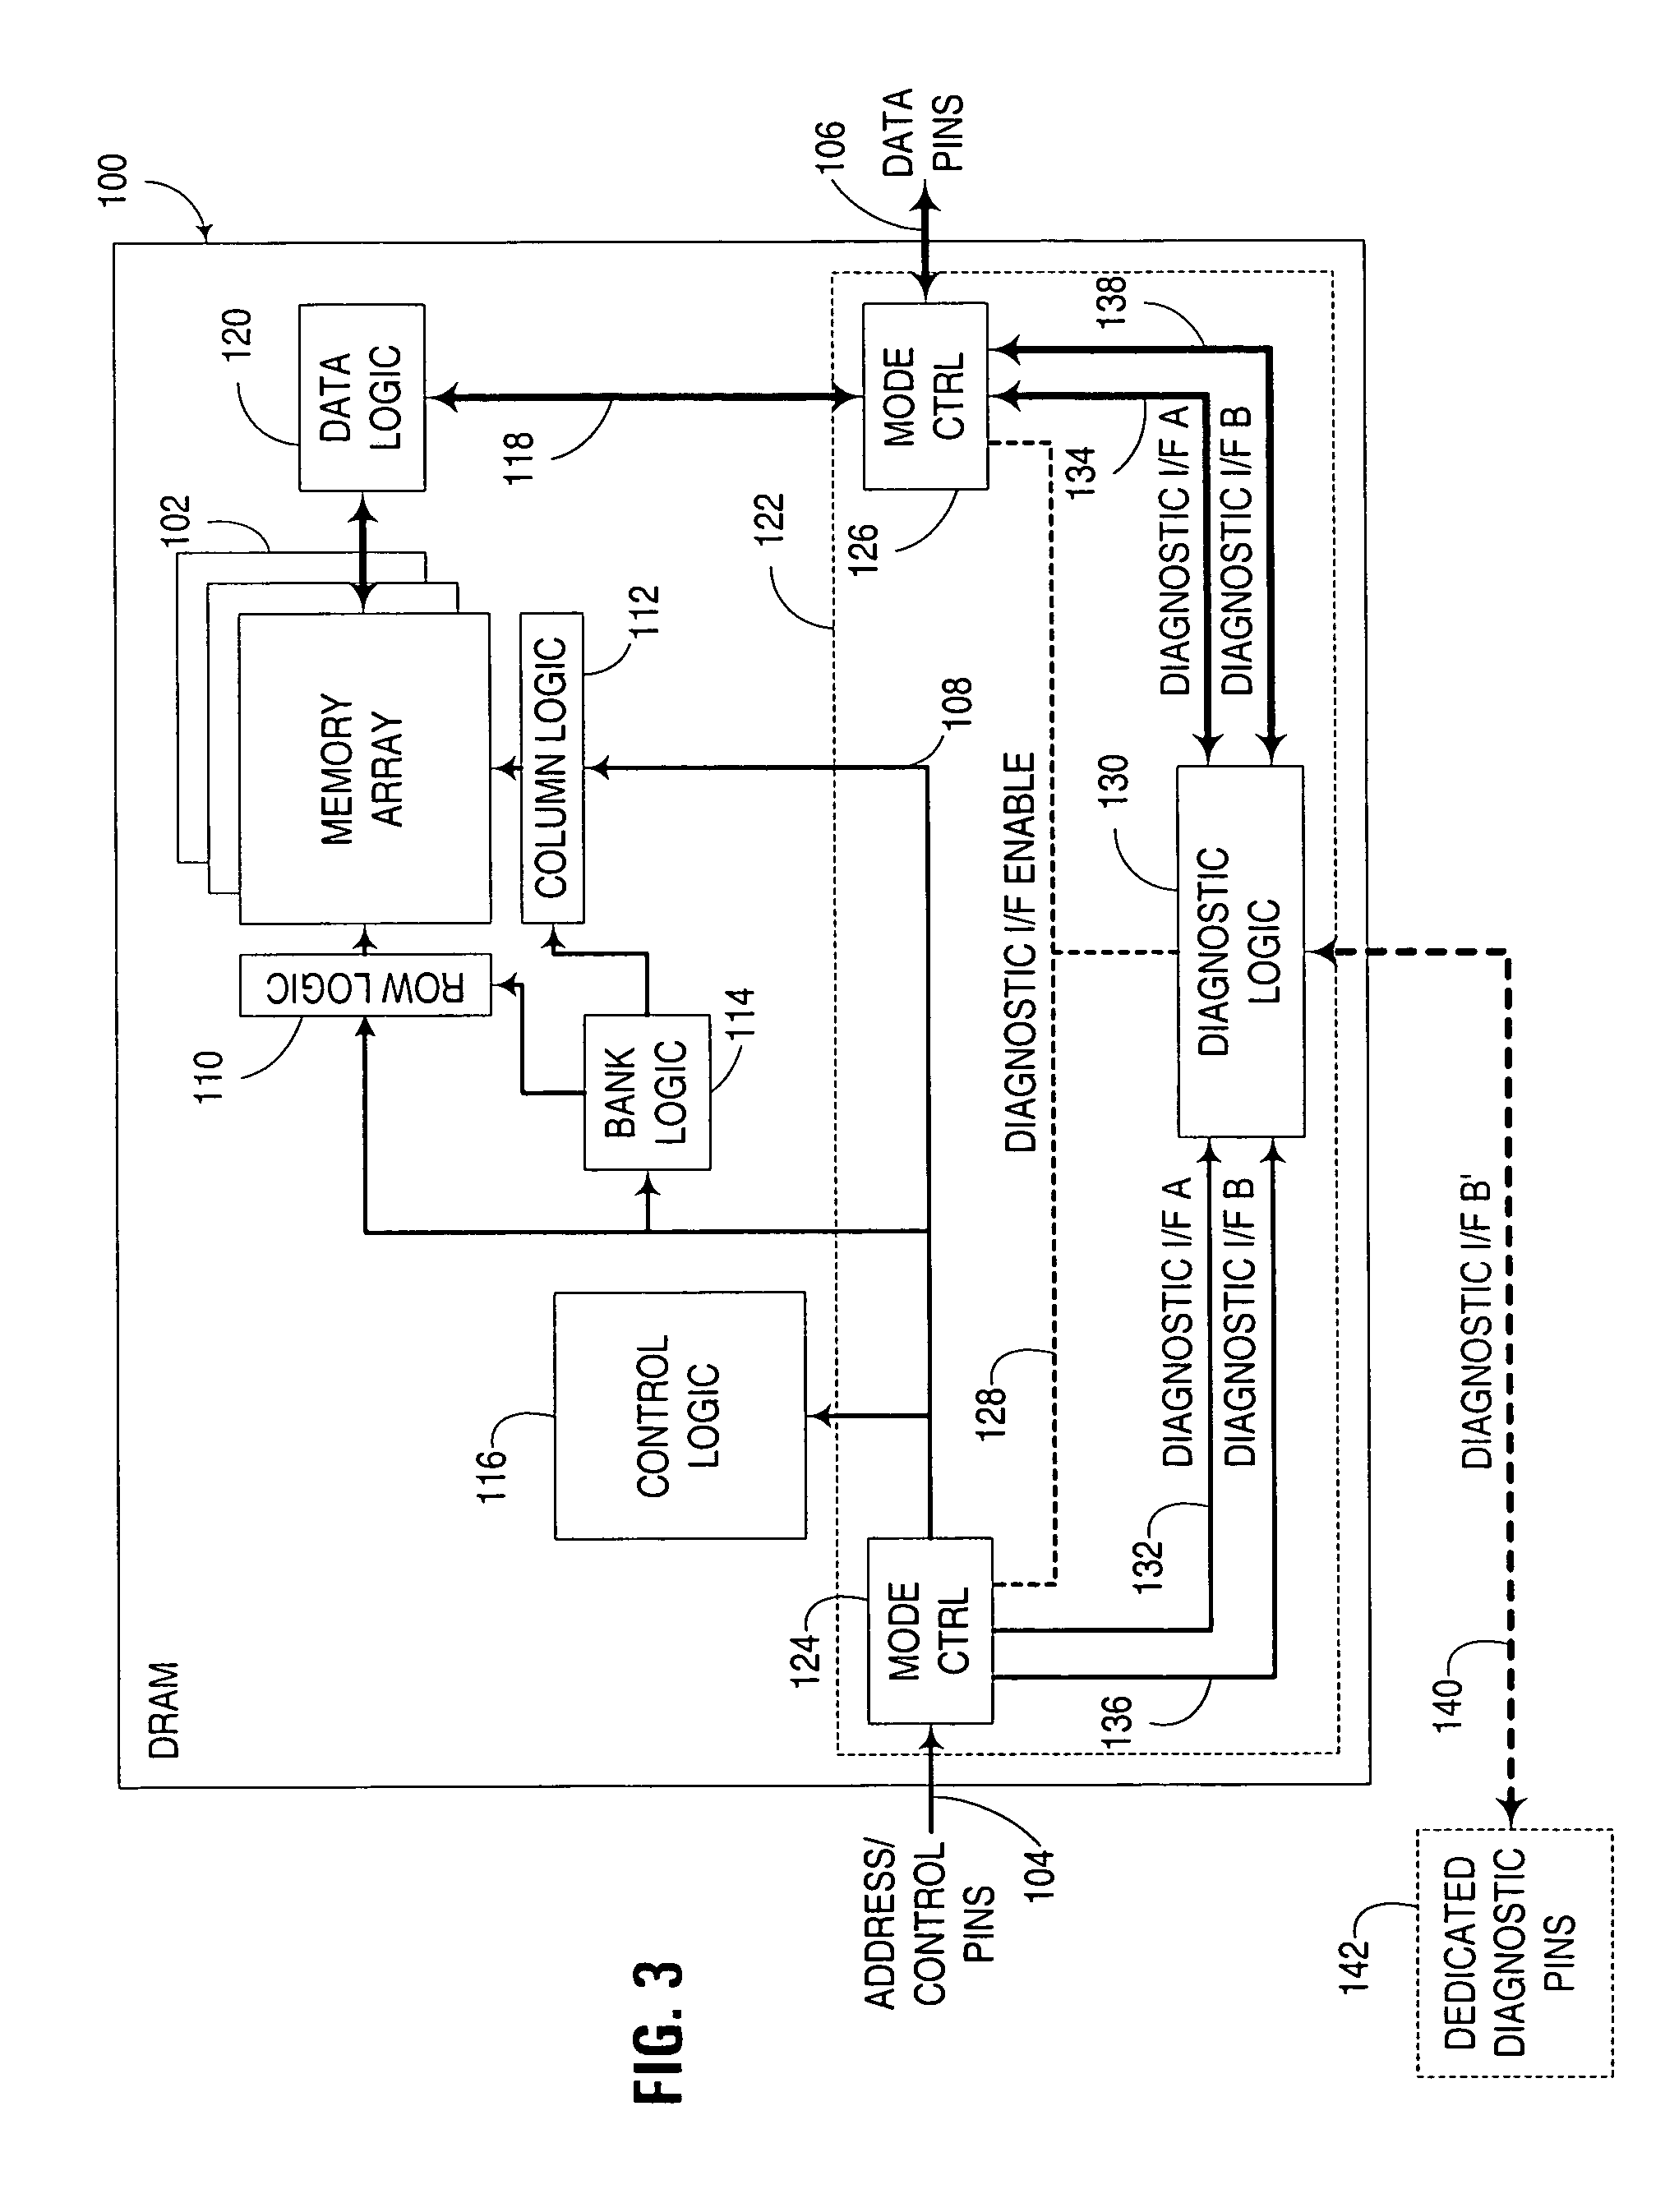 Diagnostic interface architecture for memory device